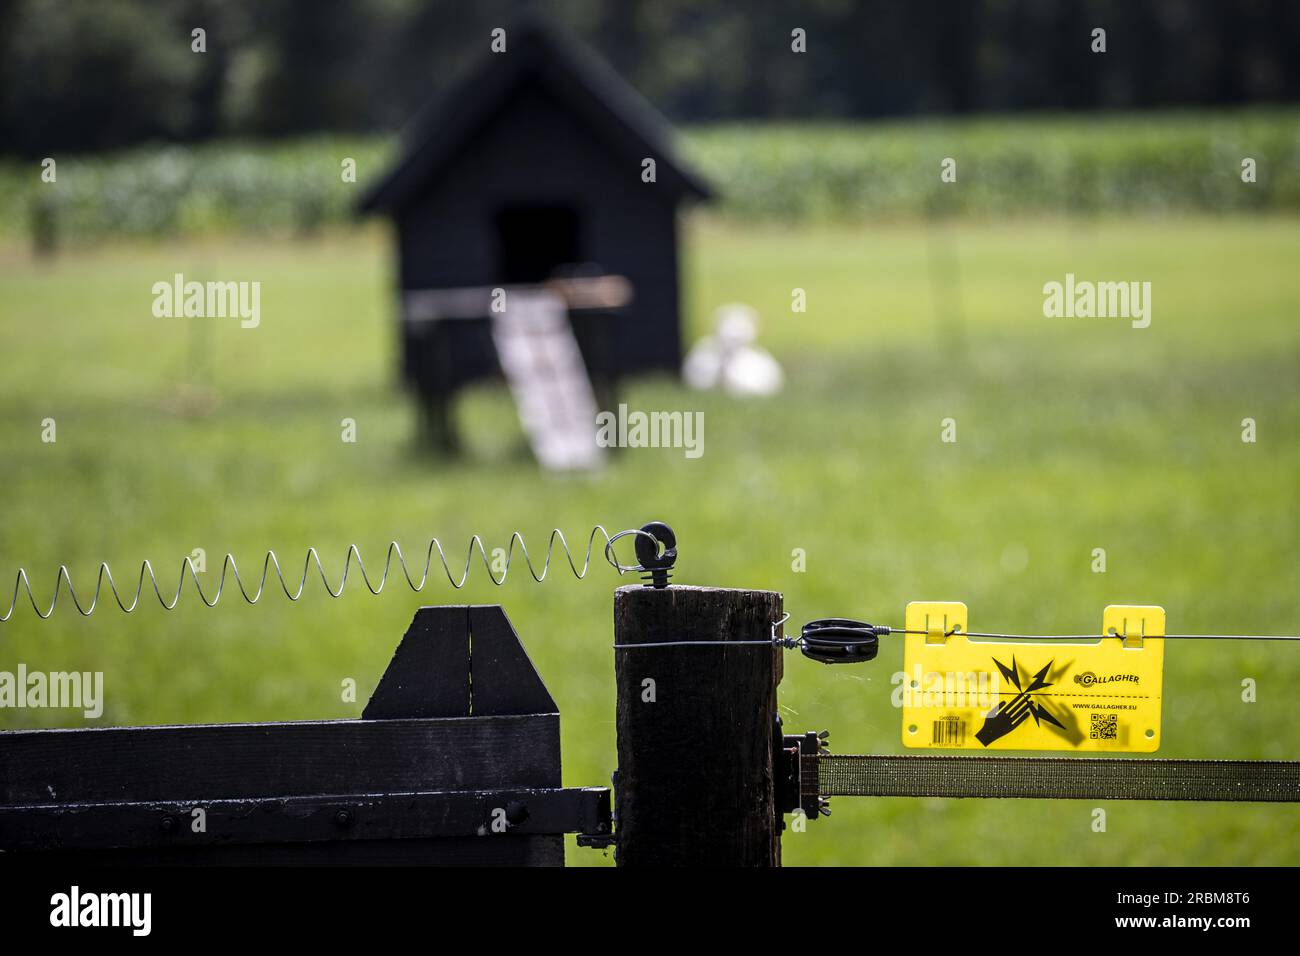 WAPSE - Pasture where a wolf was shot after injuring a sheep farmer. The sheep farmer tried to chase the wolf away after discovering it had killed some of his sheep. The pasture is equipped with a wolf-resistant grid with electric fence. ANP VINCENT JANNINK netherlands out - belgium out Stock Photo